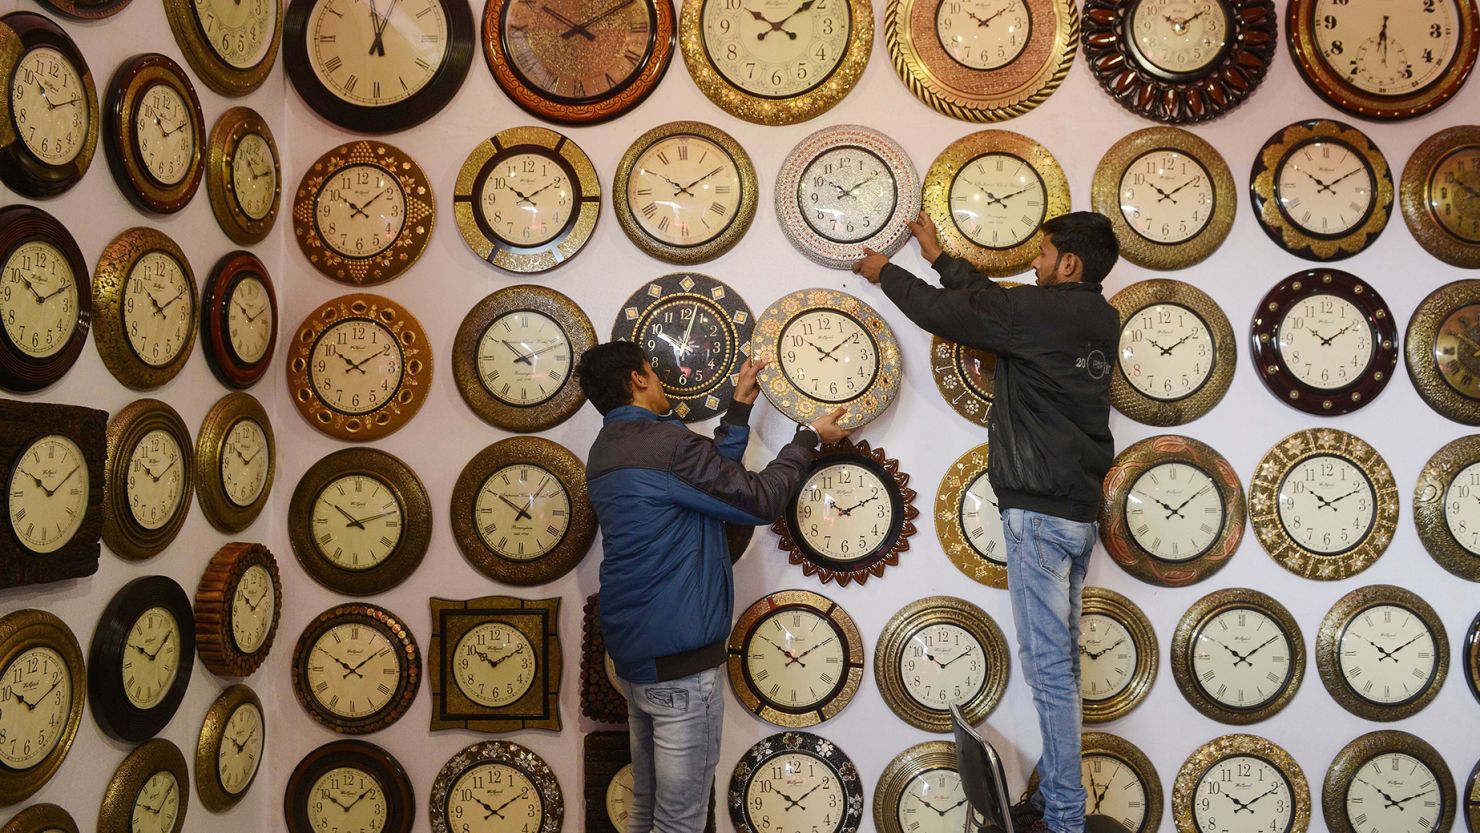 Indian exhibitors hang wall clocks for sale during the 'Punjab International Trade Expo (PITEX) in Amritsar on December 6, 2018.